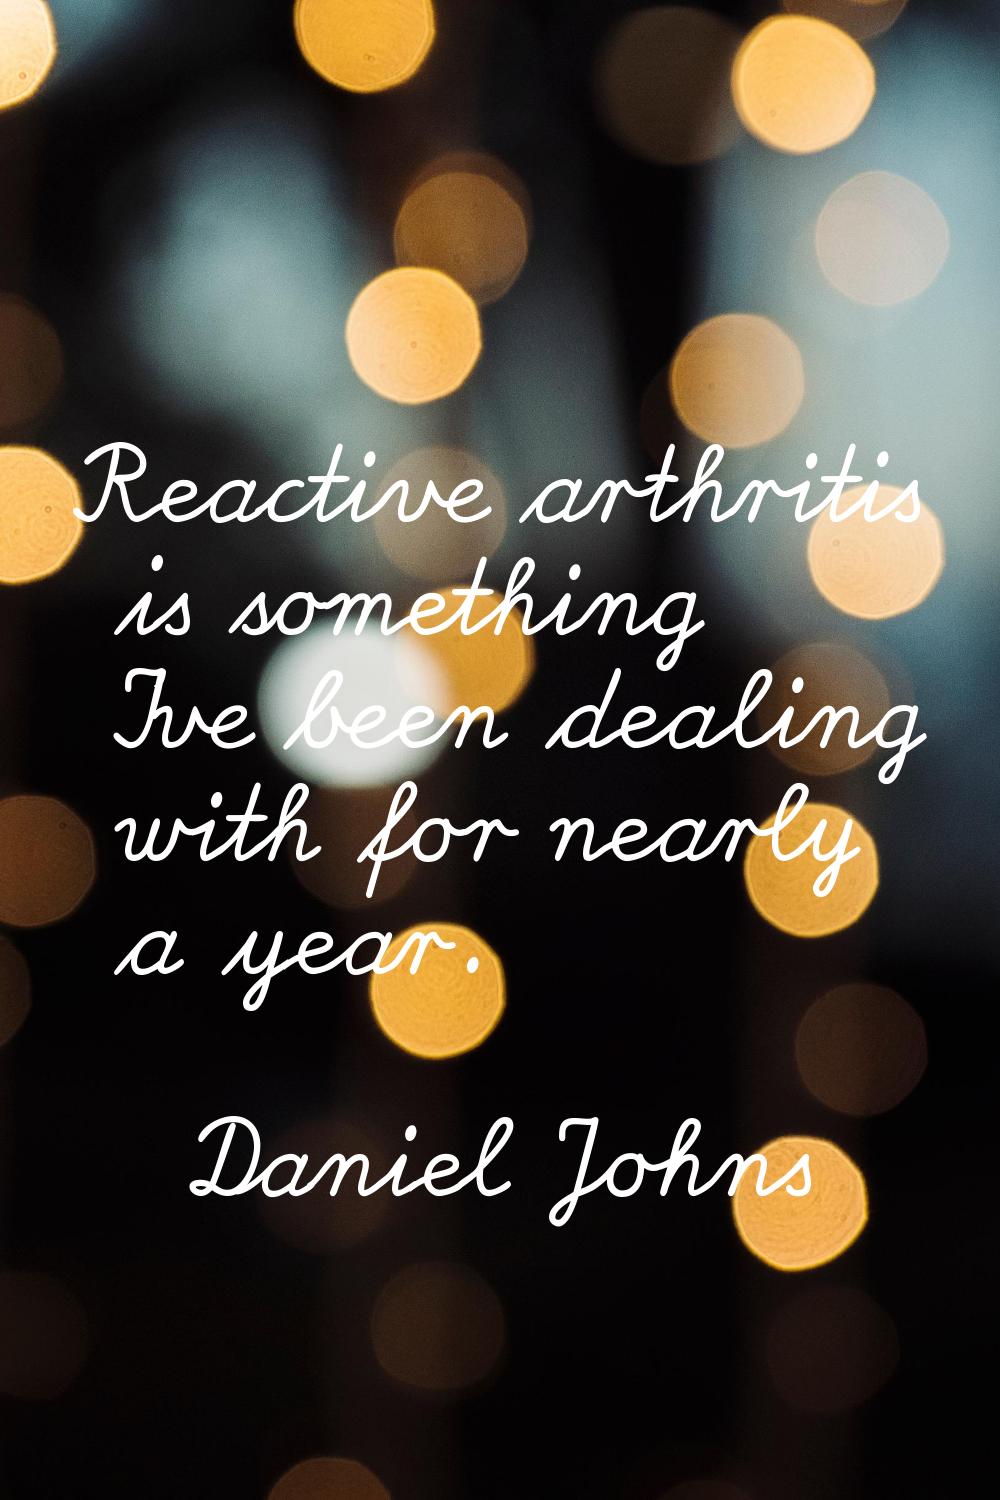 Reactive arthritis is something I've been dealing with for nearly a year.